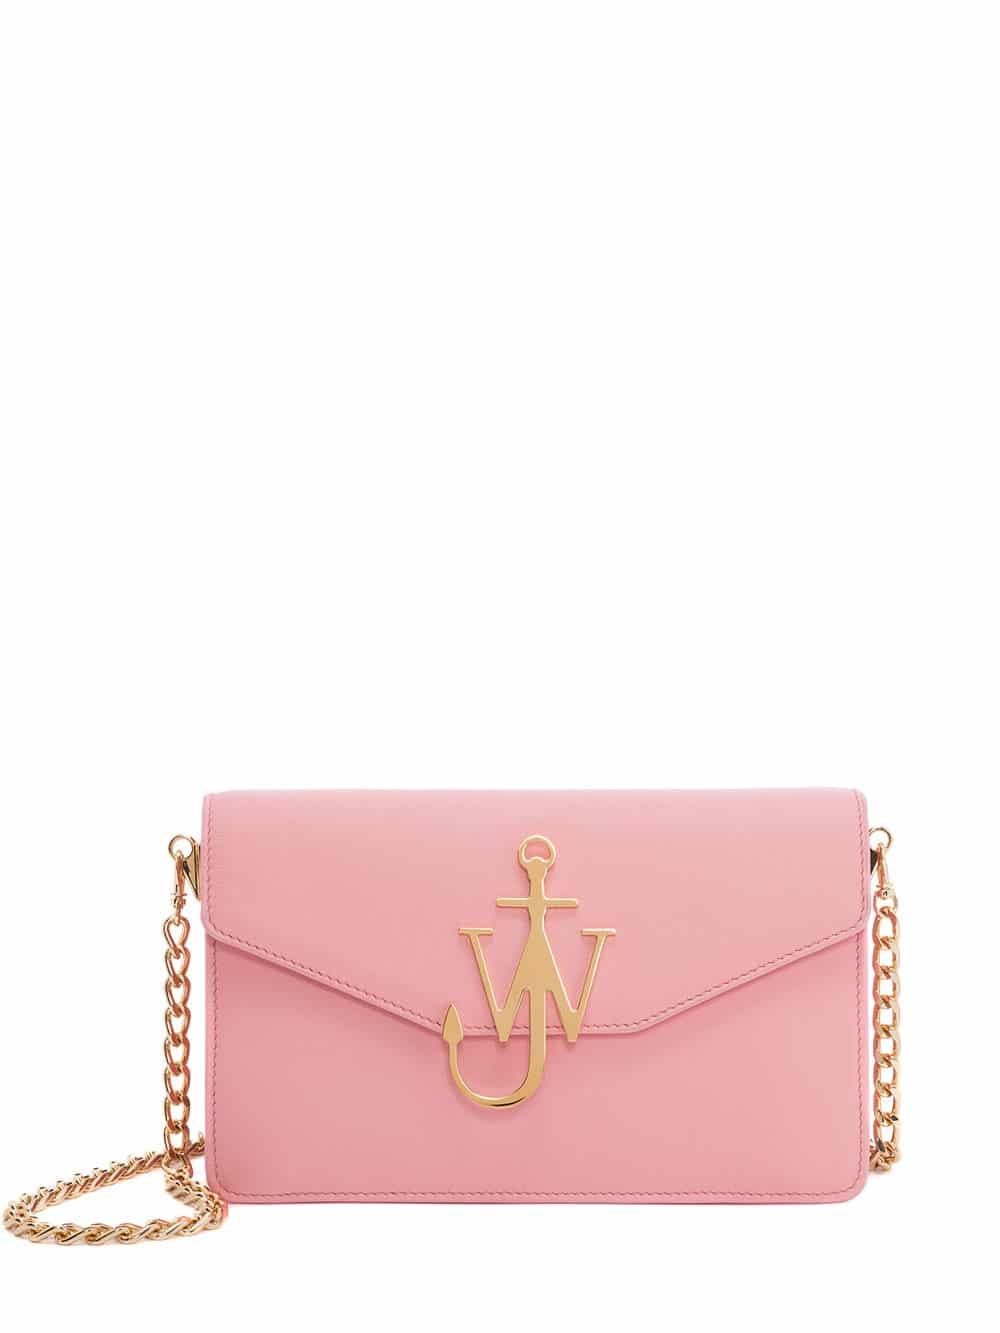 J.W. Anderson Logo Purse Bag Reference Guide - Spotted Fashion